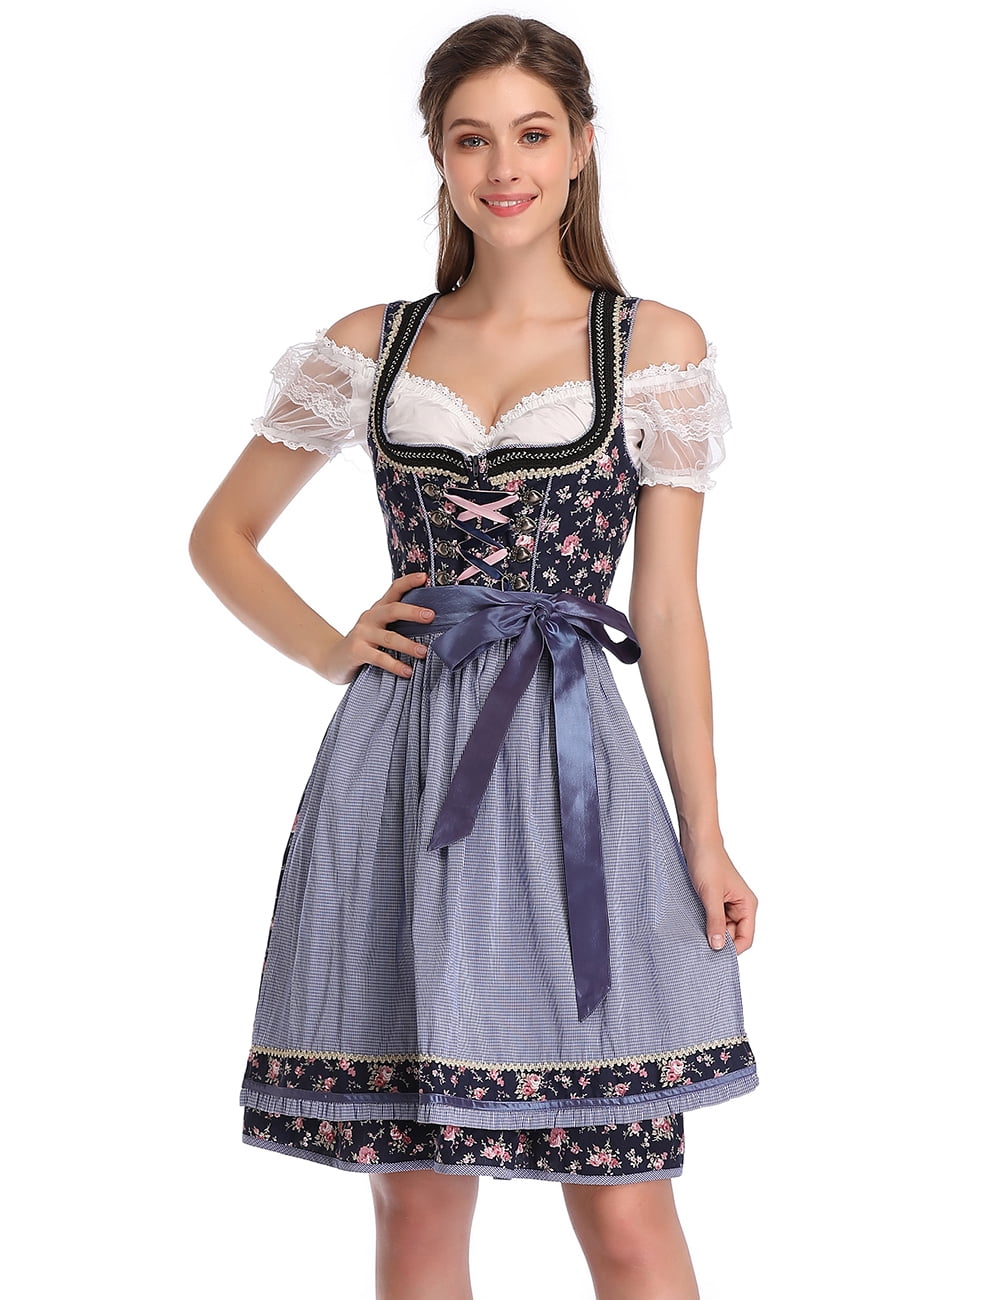 what is the female german dress called